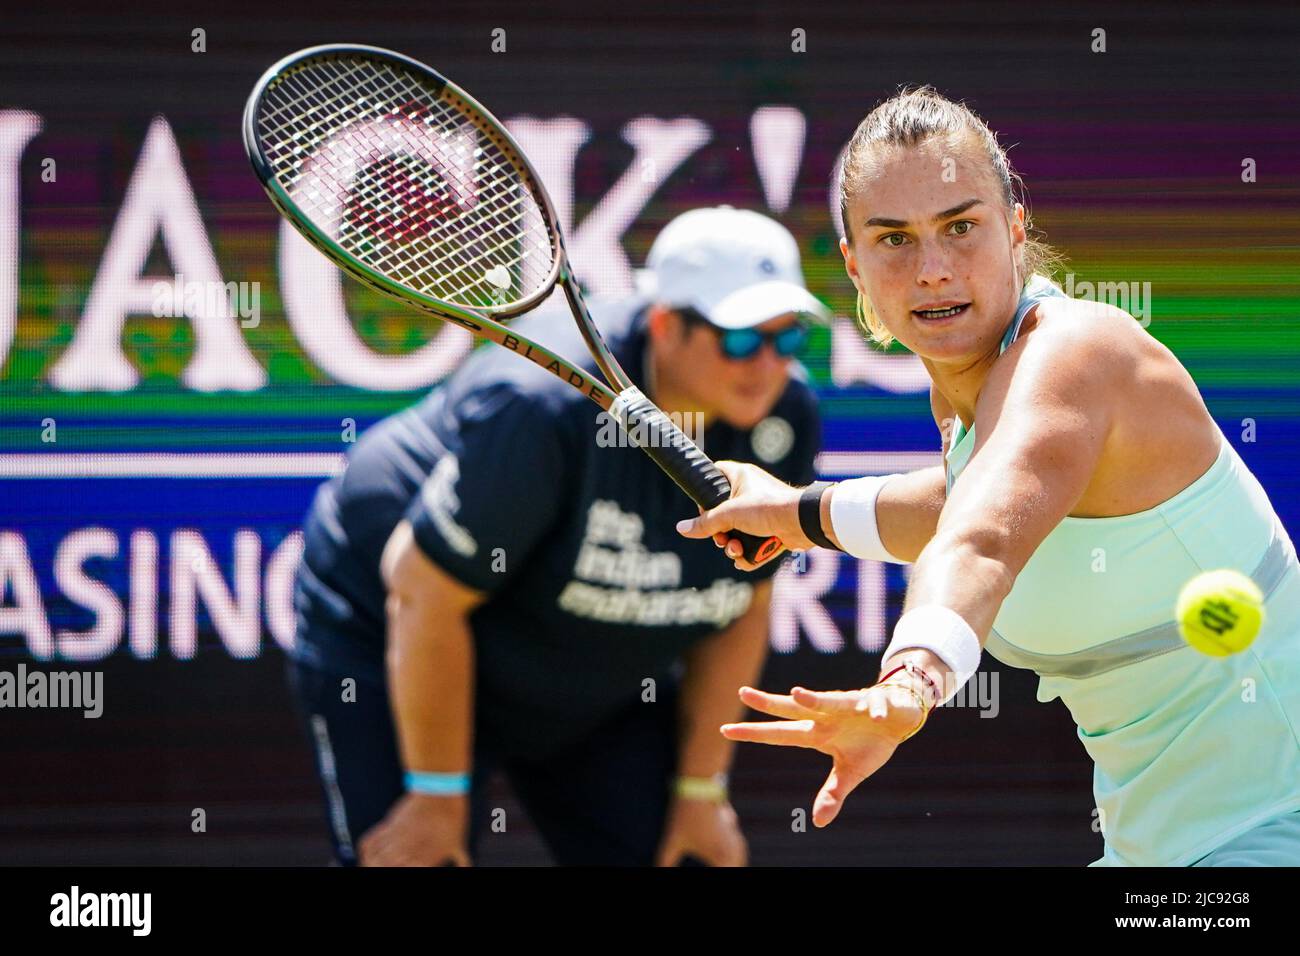 'S-HERTOGENBOSCH, NETHERLANDS - JUNE 11:  during the Womens Singles Semi Finals match between Aryna Sabalenka of Belarus and Shelby Rogers of United States of America at the Autotron on June 11, 2022 in 's-Hertogenbosch, Netherlands (Photo by Joris Verwijst/BSR Agency) Stock Photo